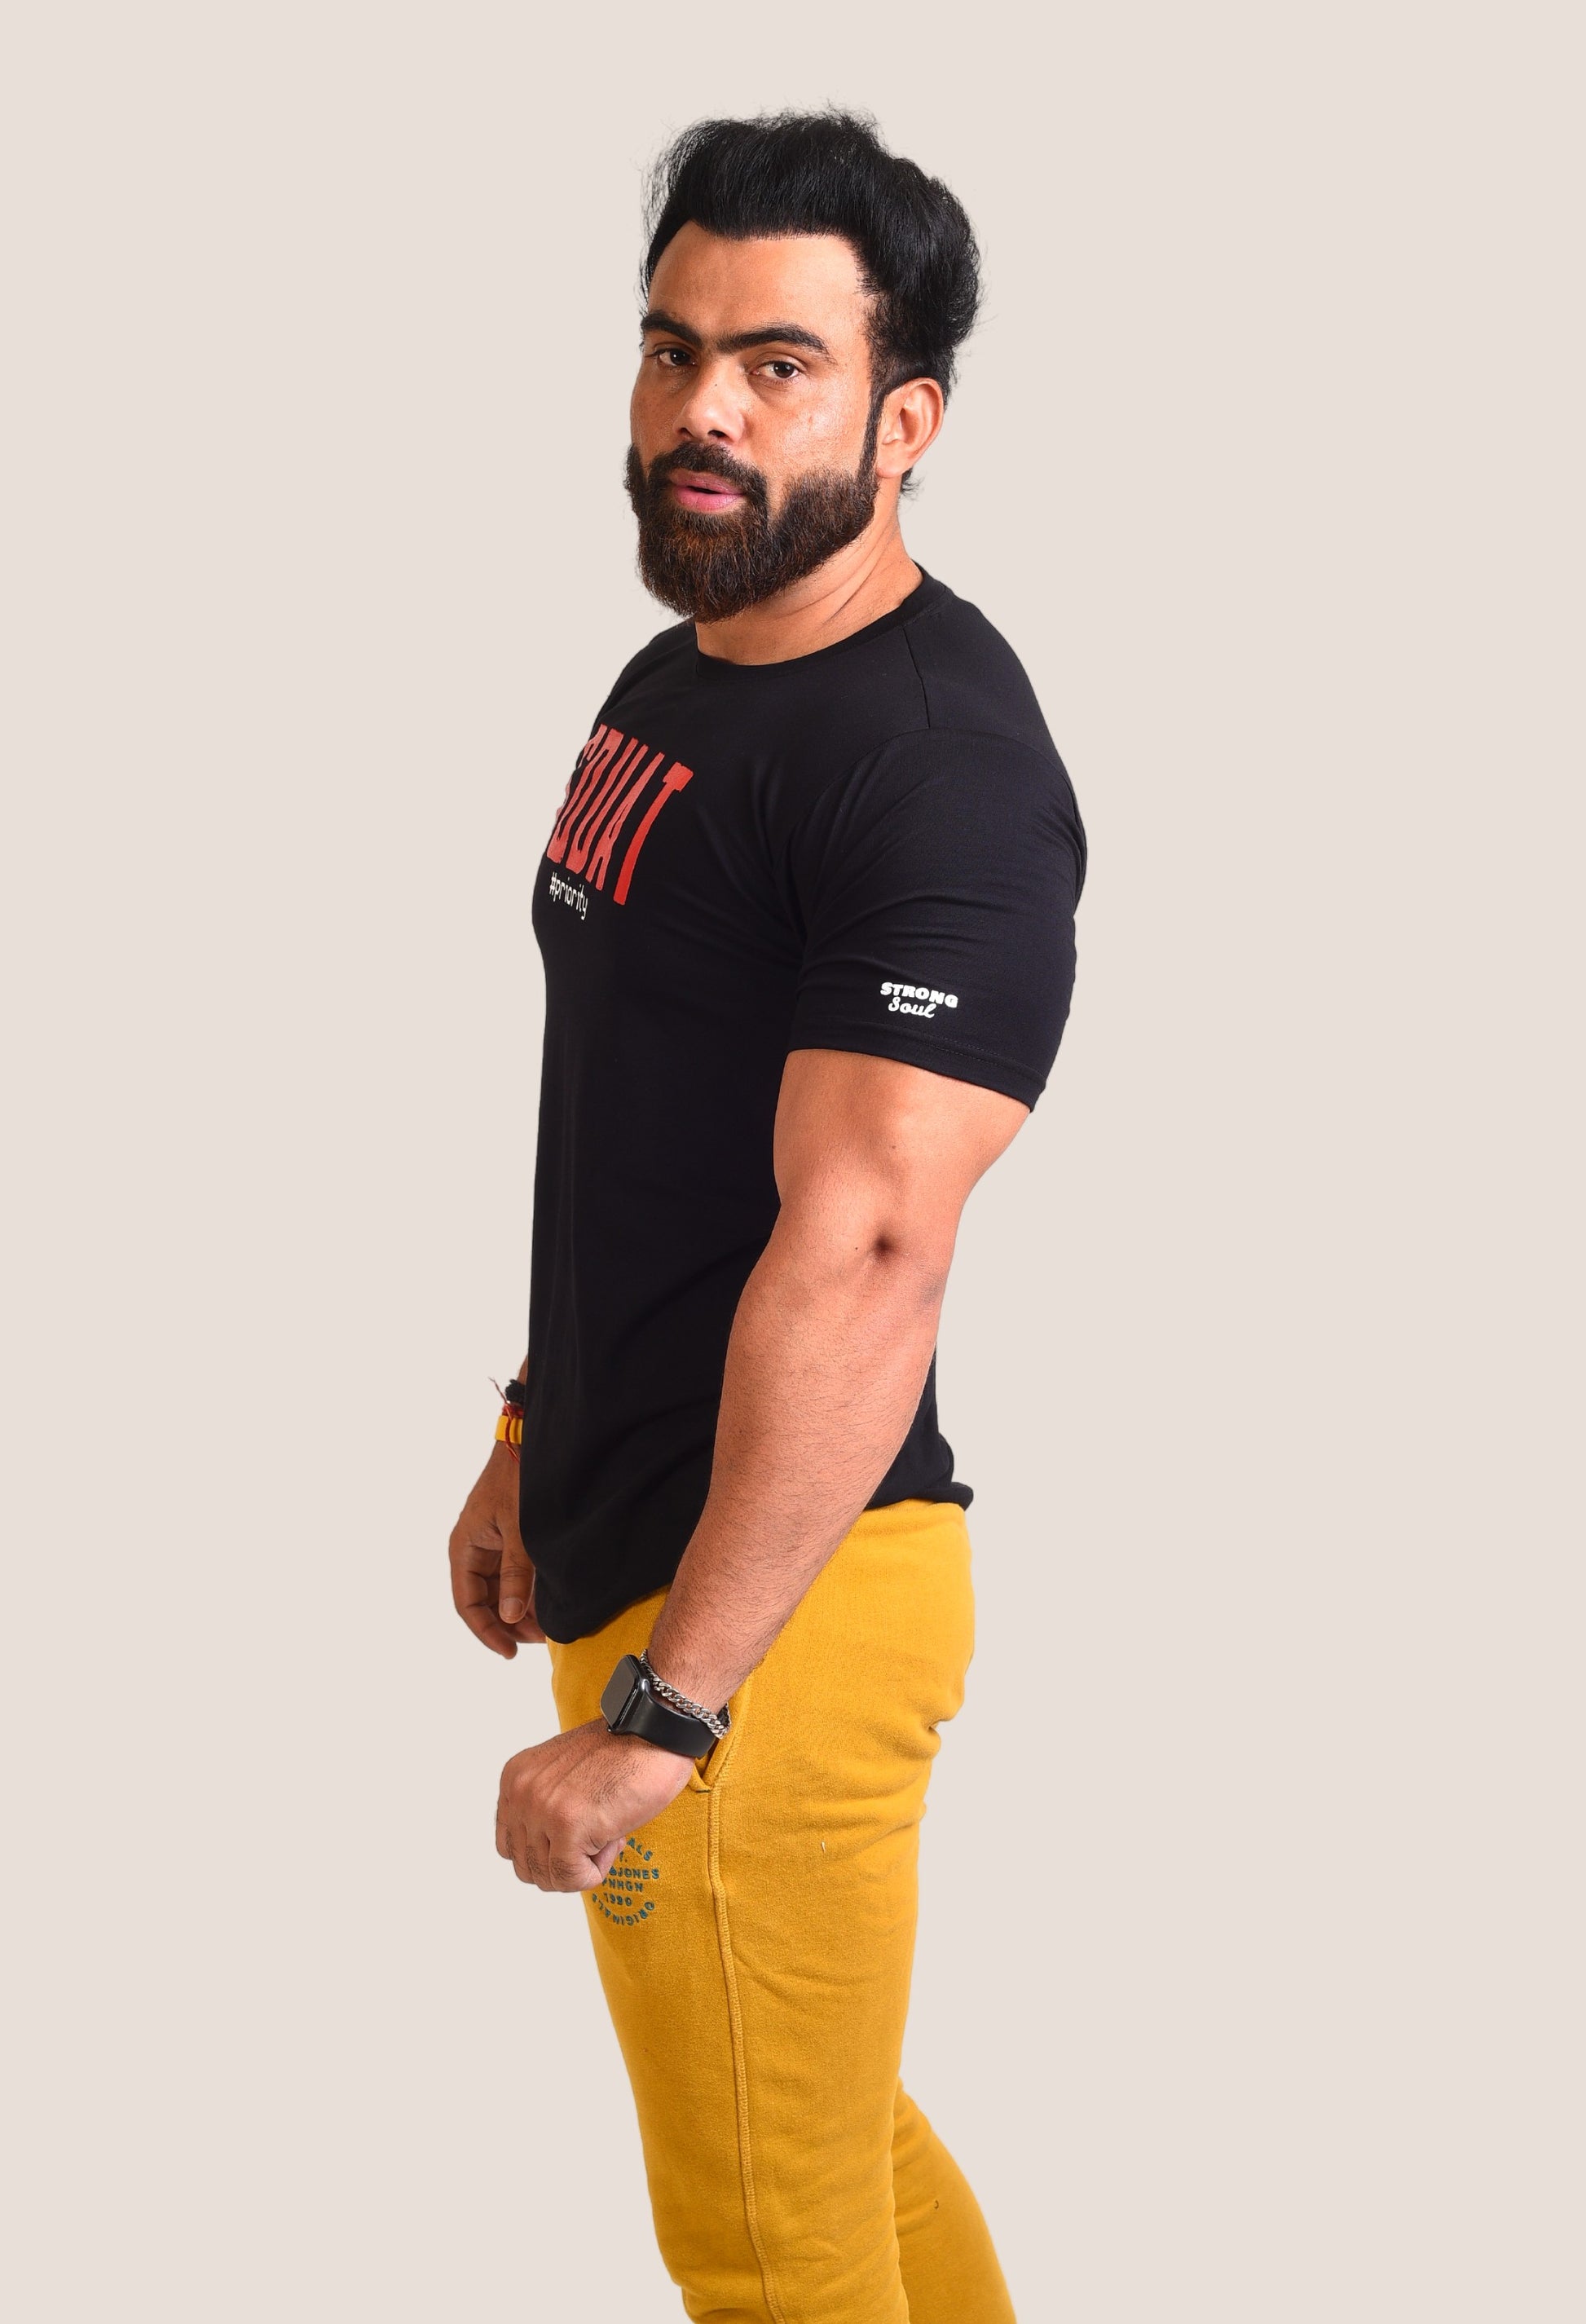 Gym T Shirt - Squat Priority - Men T-Shirt with premium cotton Lycra. The Sports T Shirt by Strong Soul